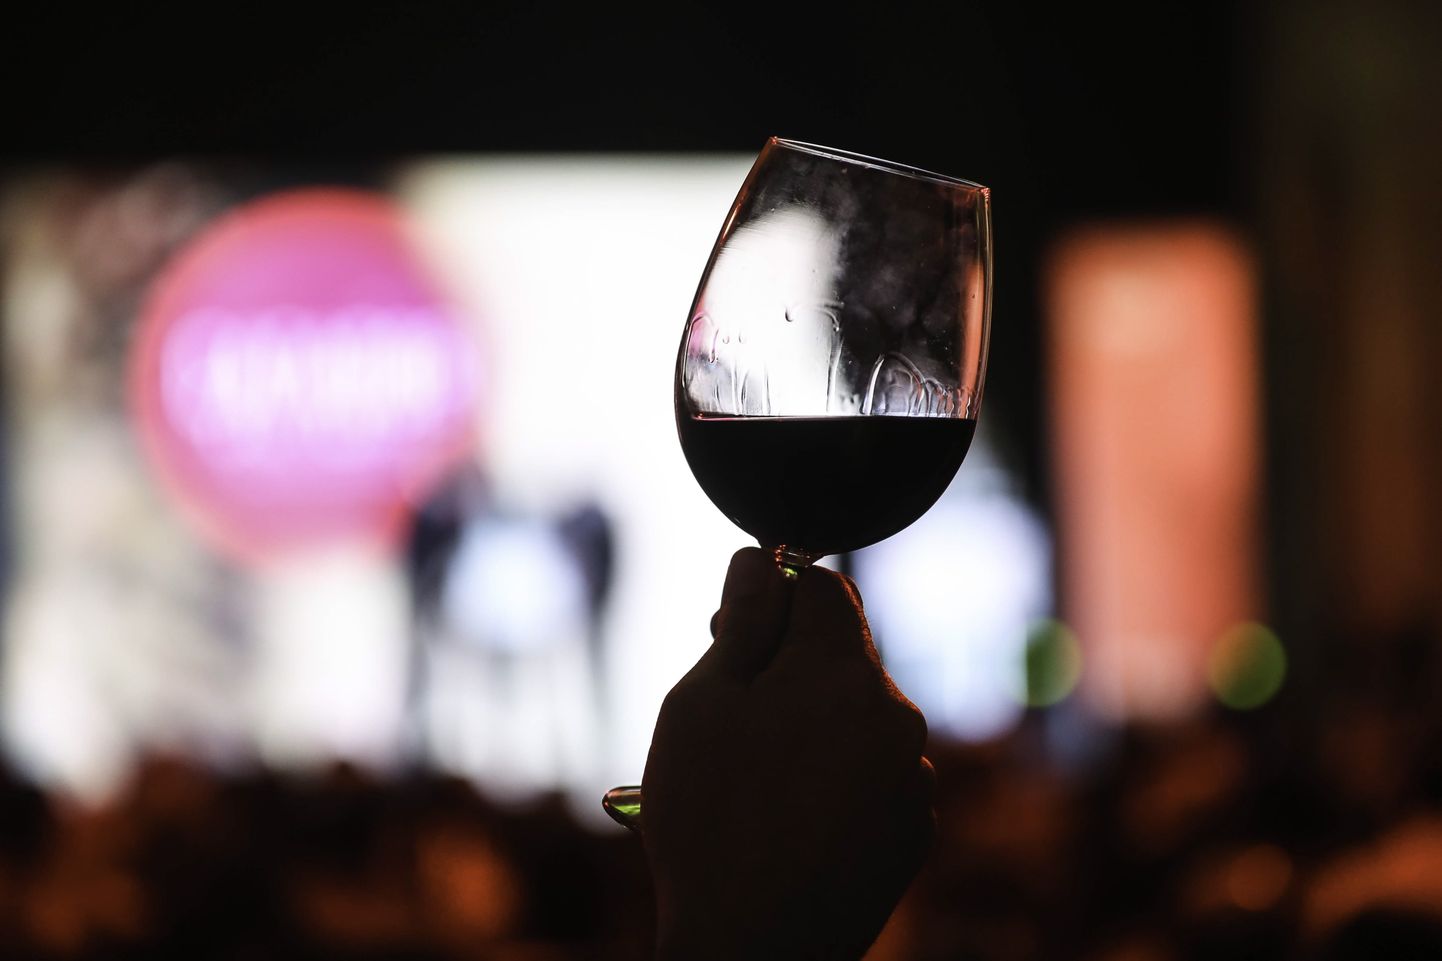 One of the attendees of the Catad'Or contest awards holds a glass of wine during the event held in Santiago, Chile, 09 July 2018. Memorias, from the Chilean vineyard El Principal, was awarded today as the best wine of the year in the Catad'Or contest, one of the most important wine competitions in Chile and Latin America.  EPA/Alberto Vald?©s